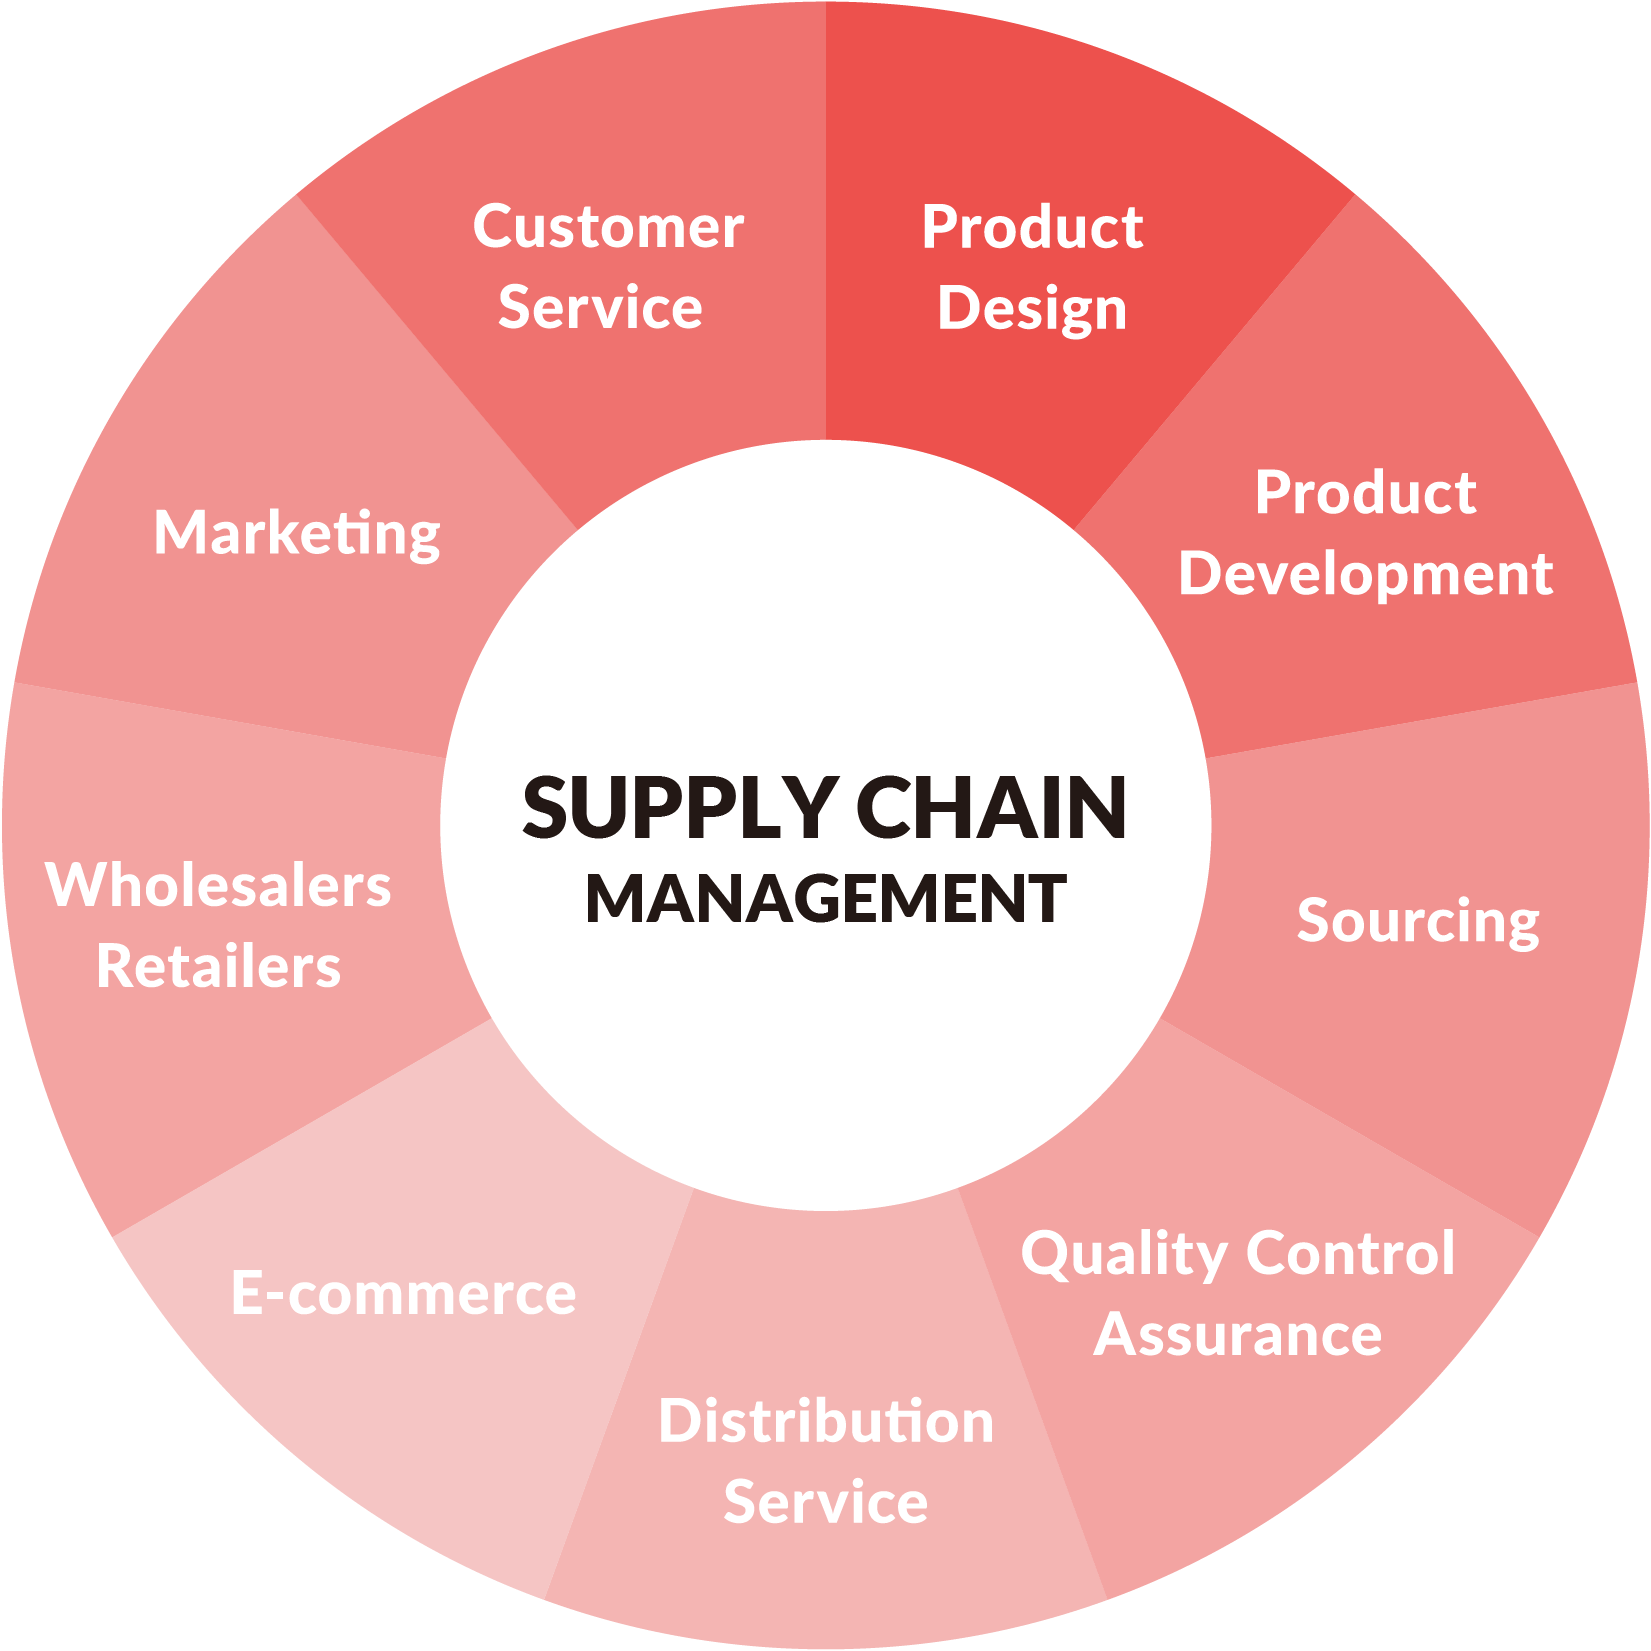 Product Design Product Development Sourcing Quality Control/Assurance Distribution Service E-commerce Wholesalers/Retailers Marketing Customer Service